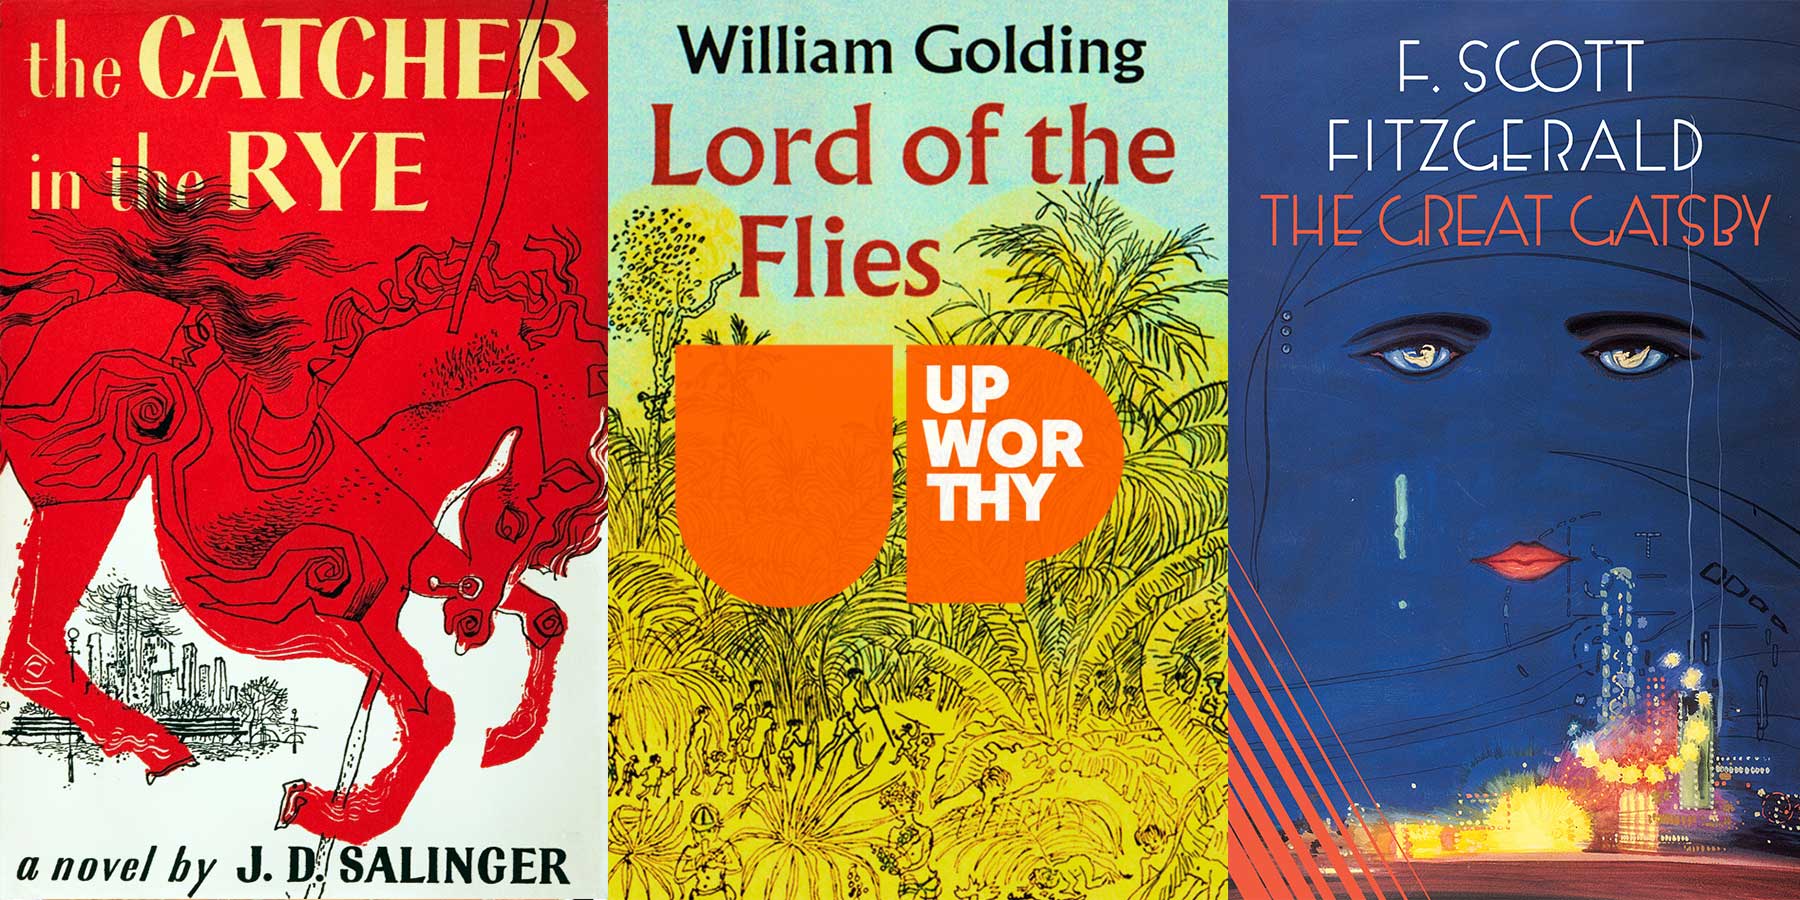 13 Classic Works of Literature With Upworthy Titles